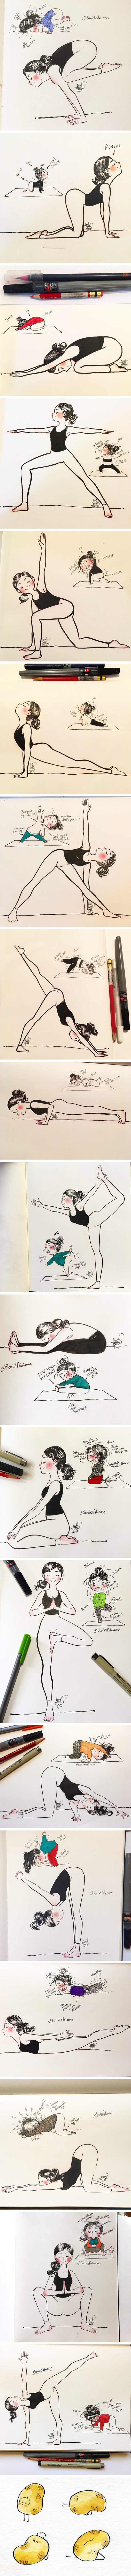 Yoga is harder than it looks, artist illustrates the expectation and reality in comic